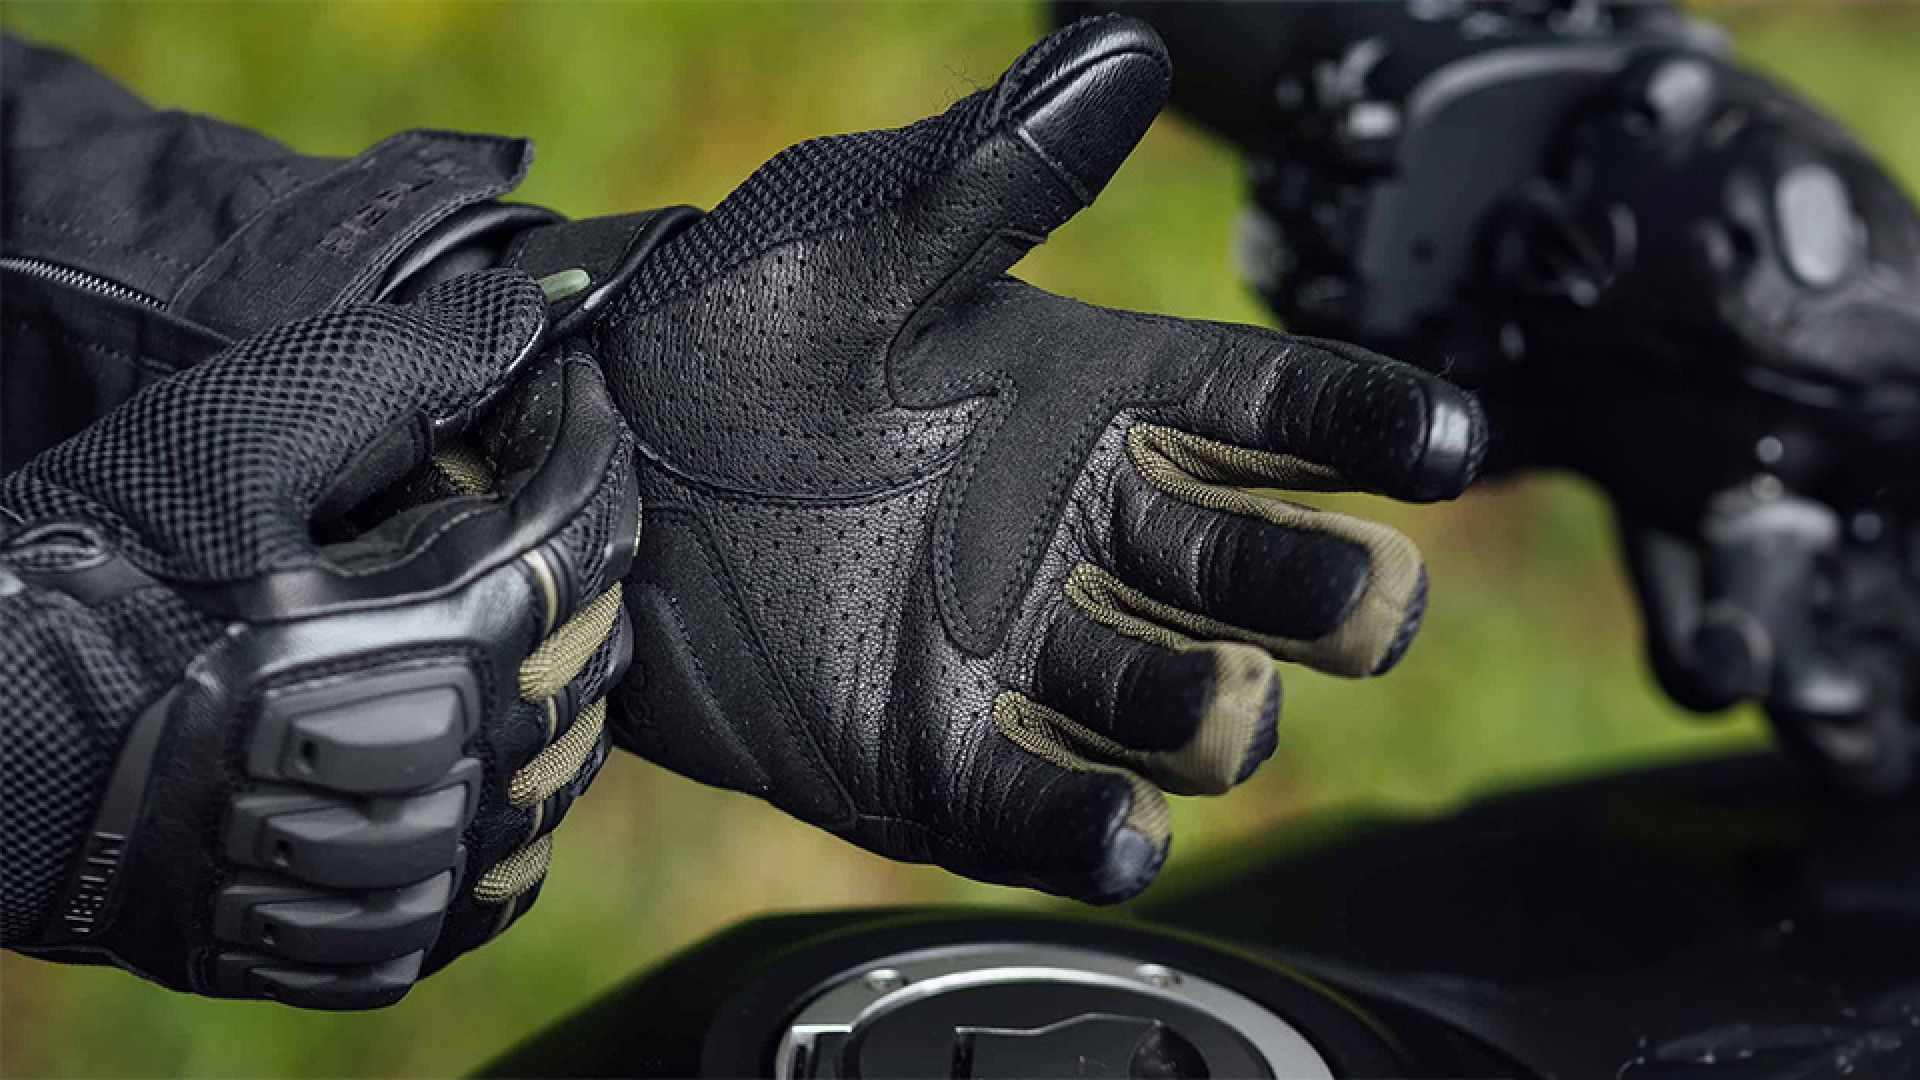 https://www.raceleathers.co.uk/image/cache/catalog/Blog%20Images/How%20to%20Choose%20Motorcycle%20Gloves-1920x1080.jpg